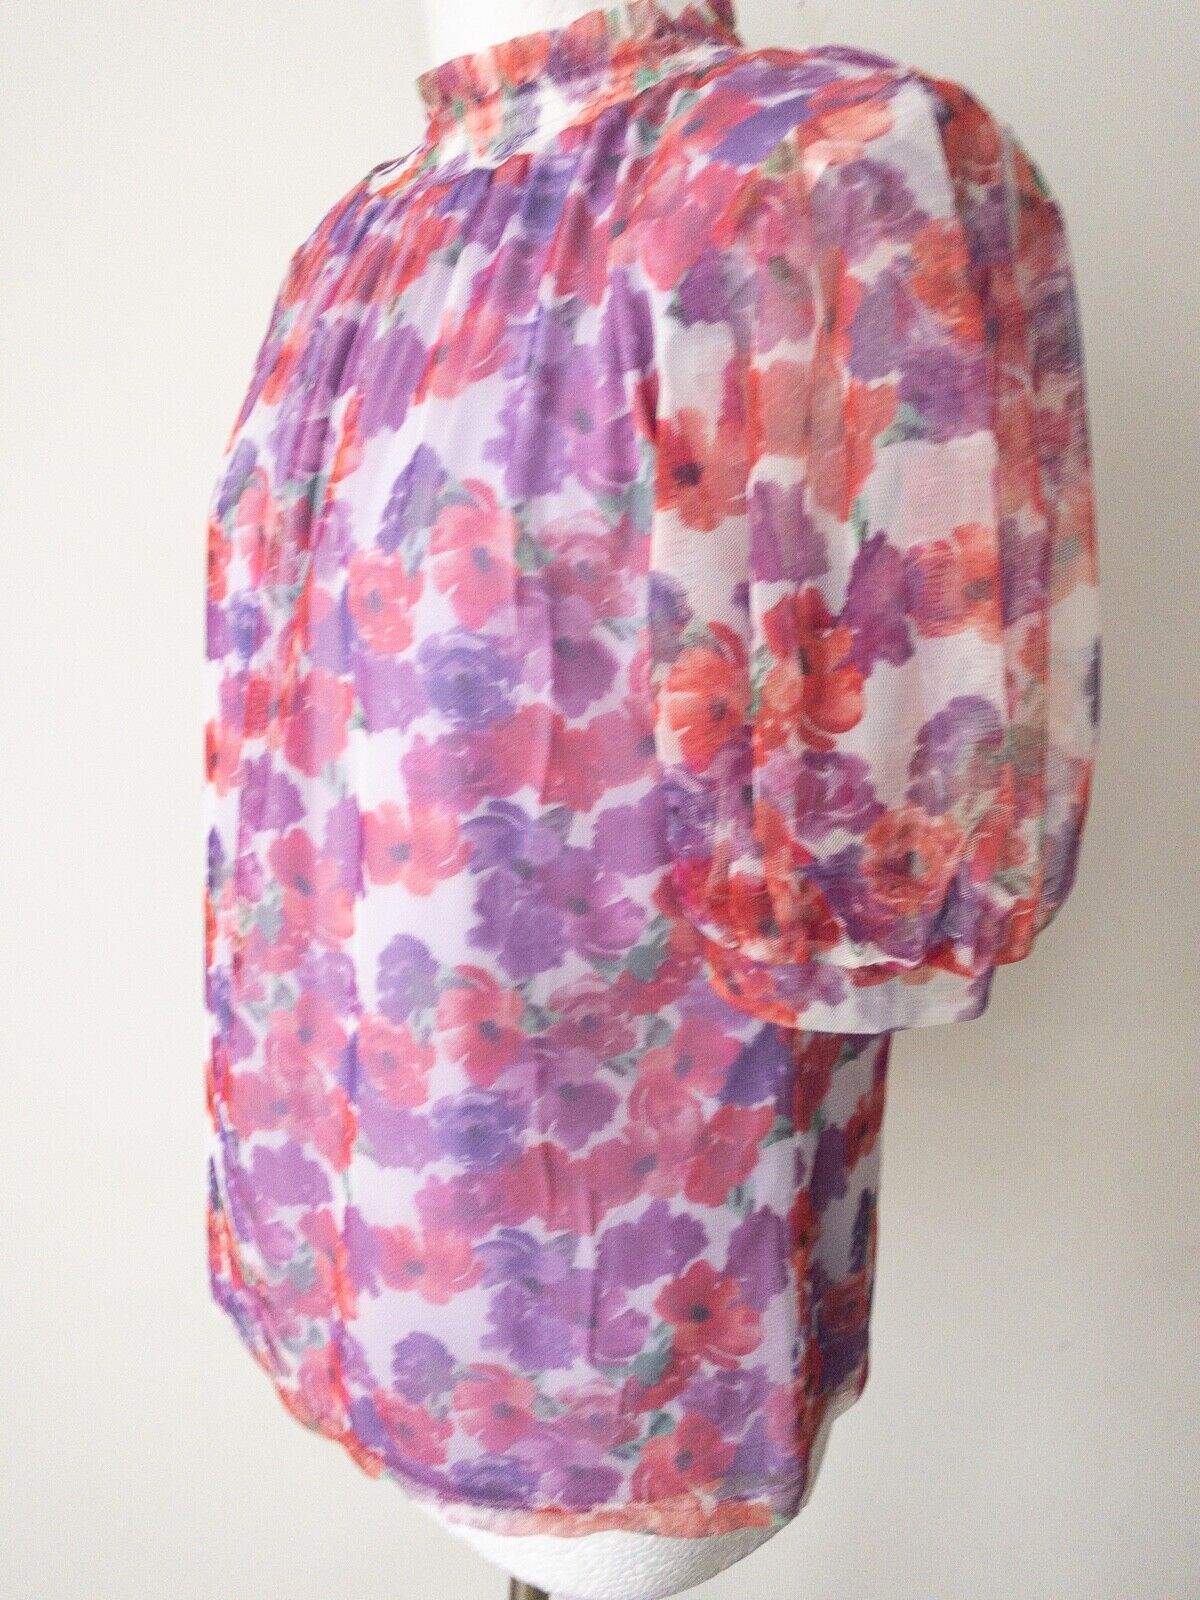 Floral Mesh Layered Pink Purple Floral Size 10